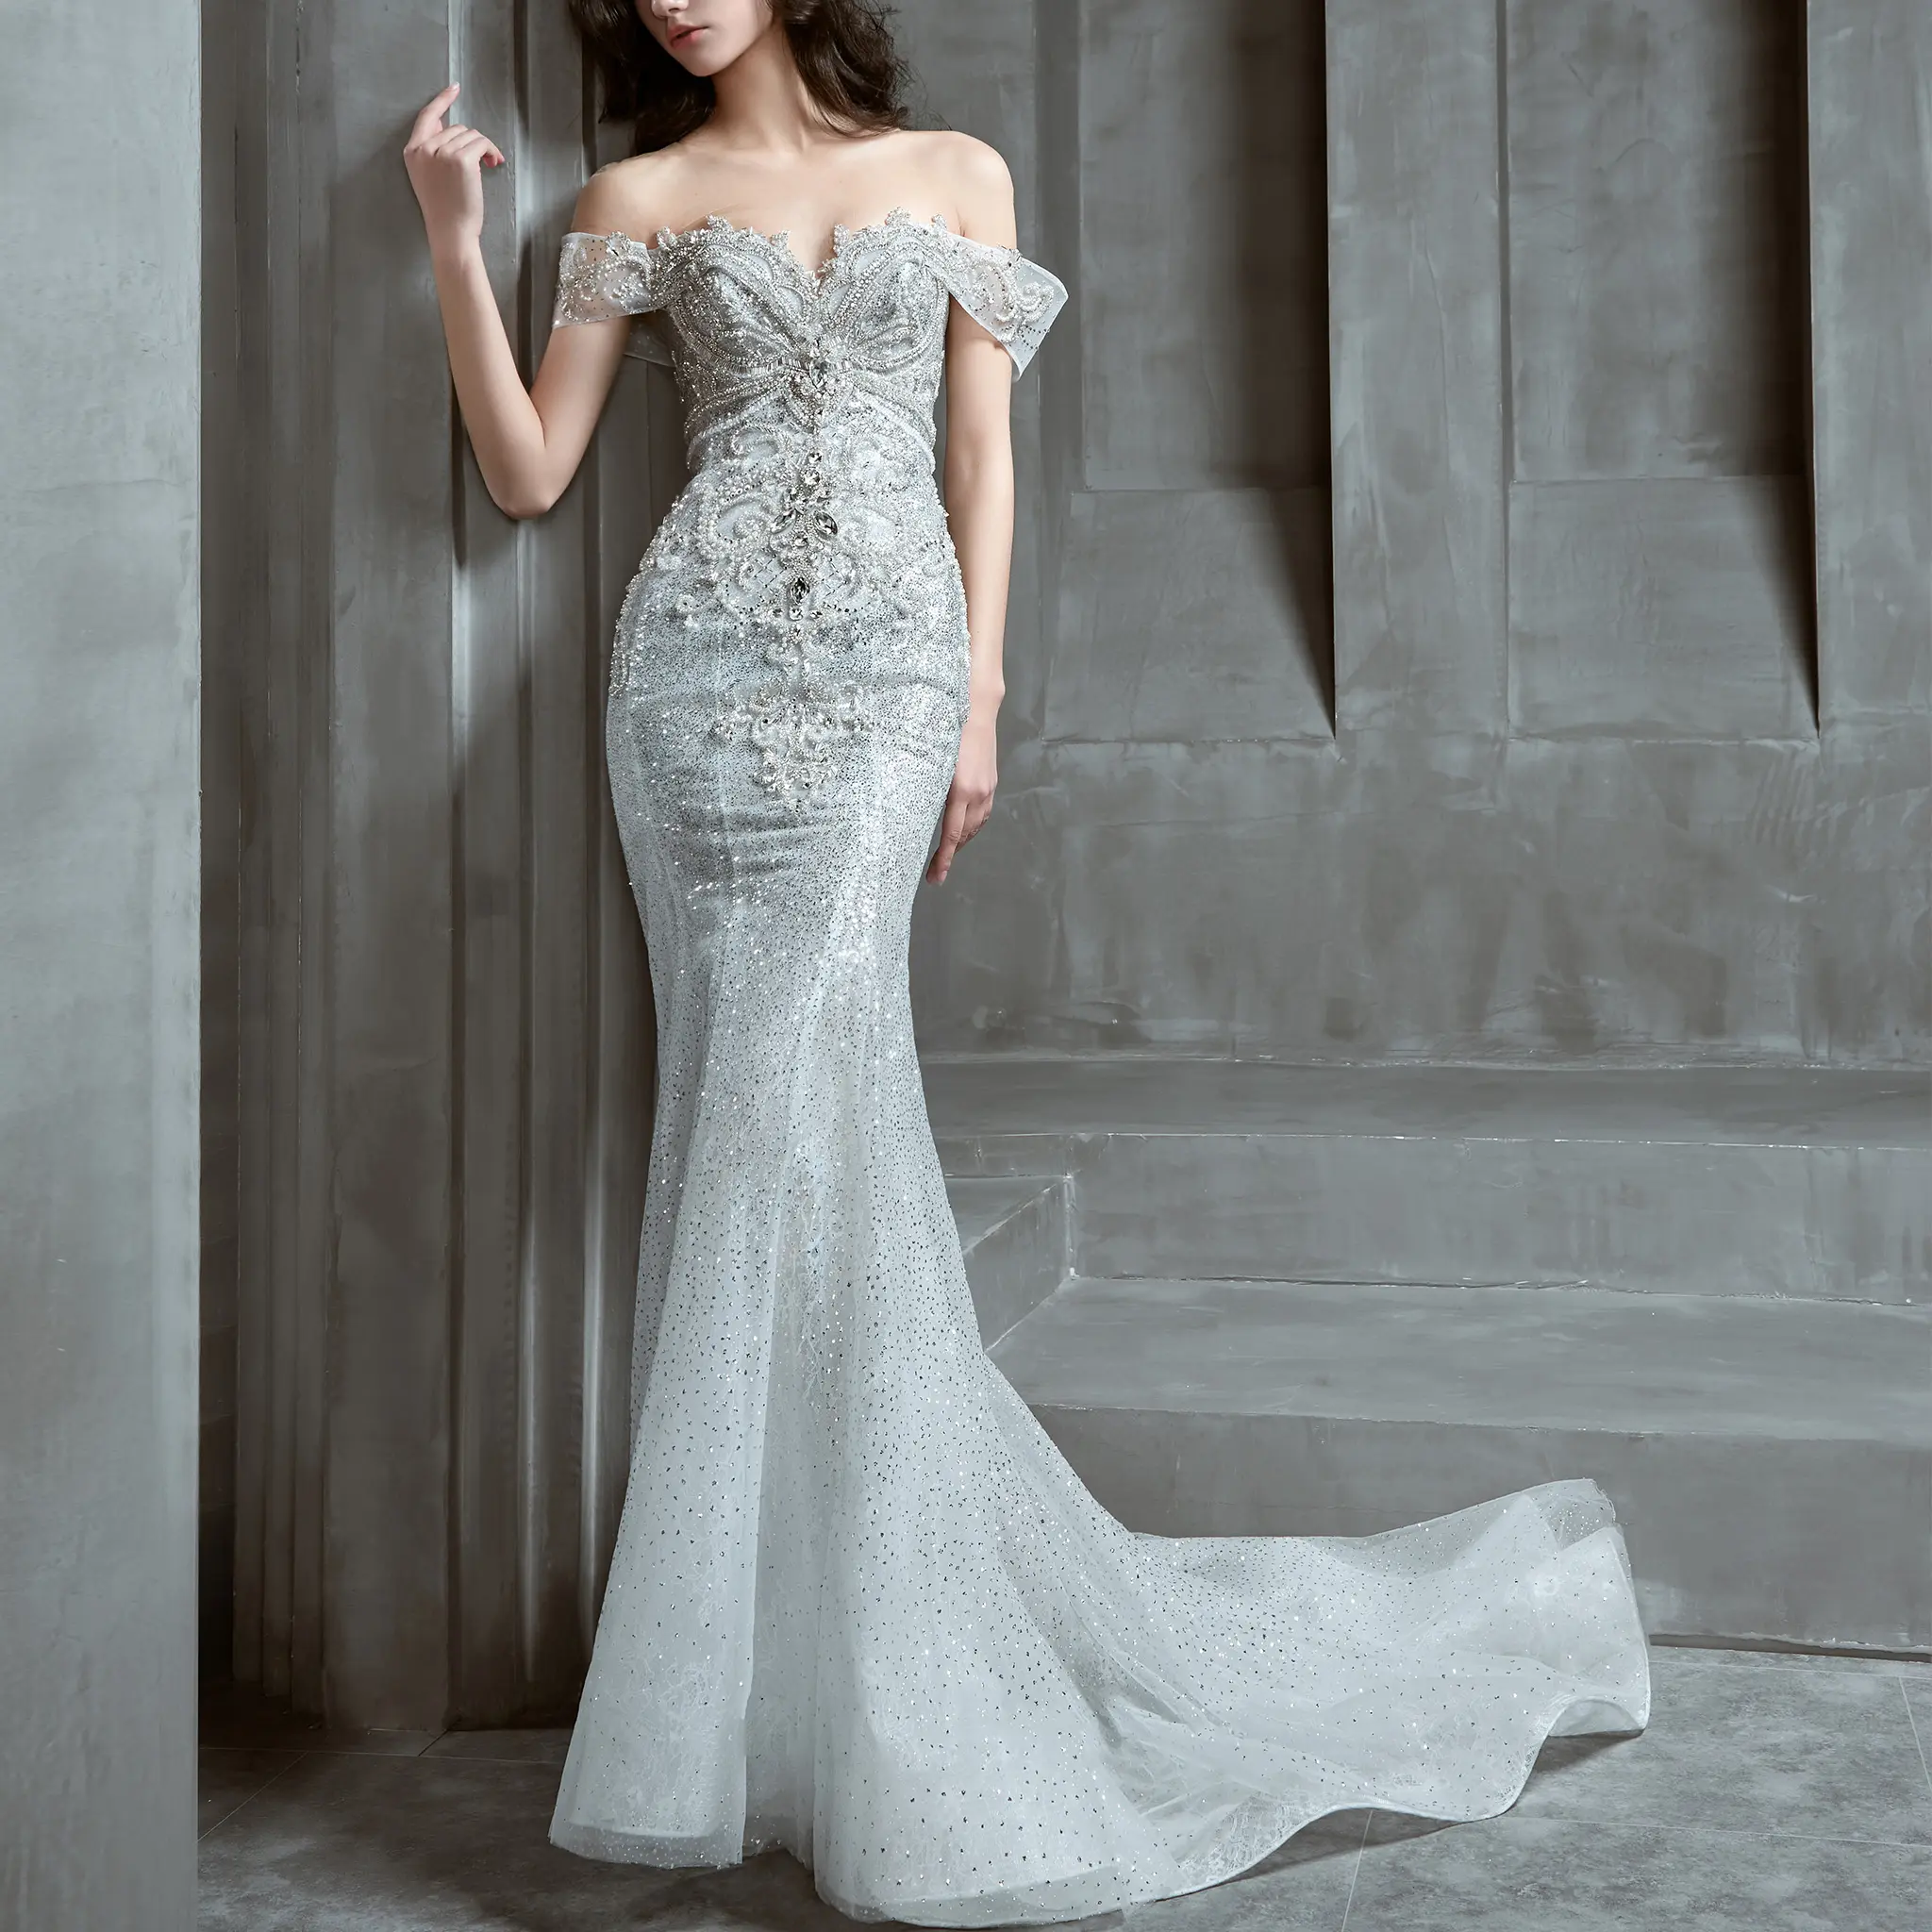 Luxury Beaded Mermaid Wedding Dress With Sparkly Crystals Diamonds Bridal Gowns Off the Shoulder Sleeves